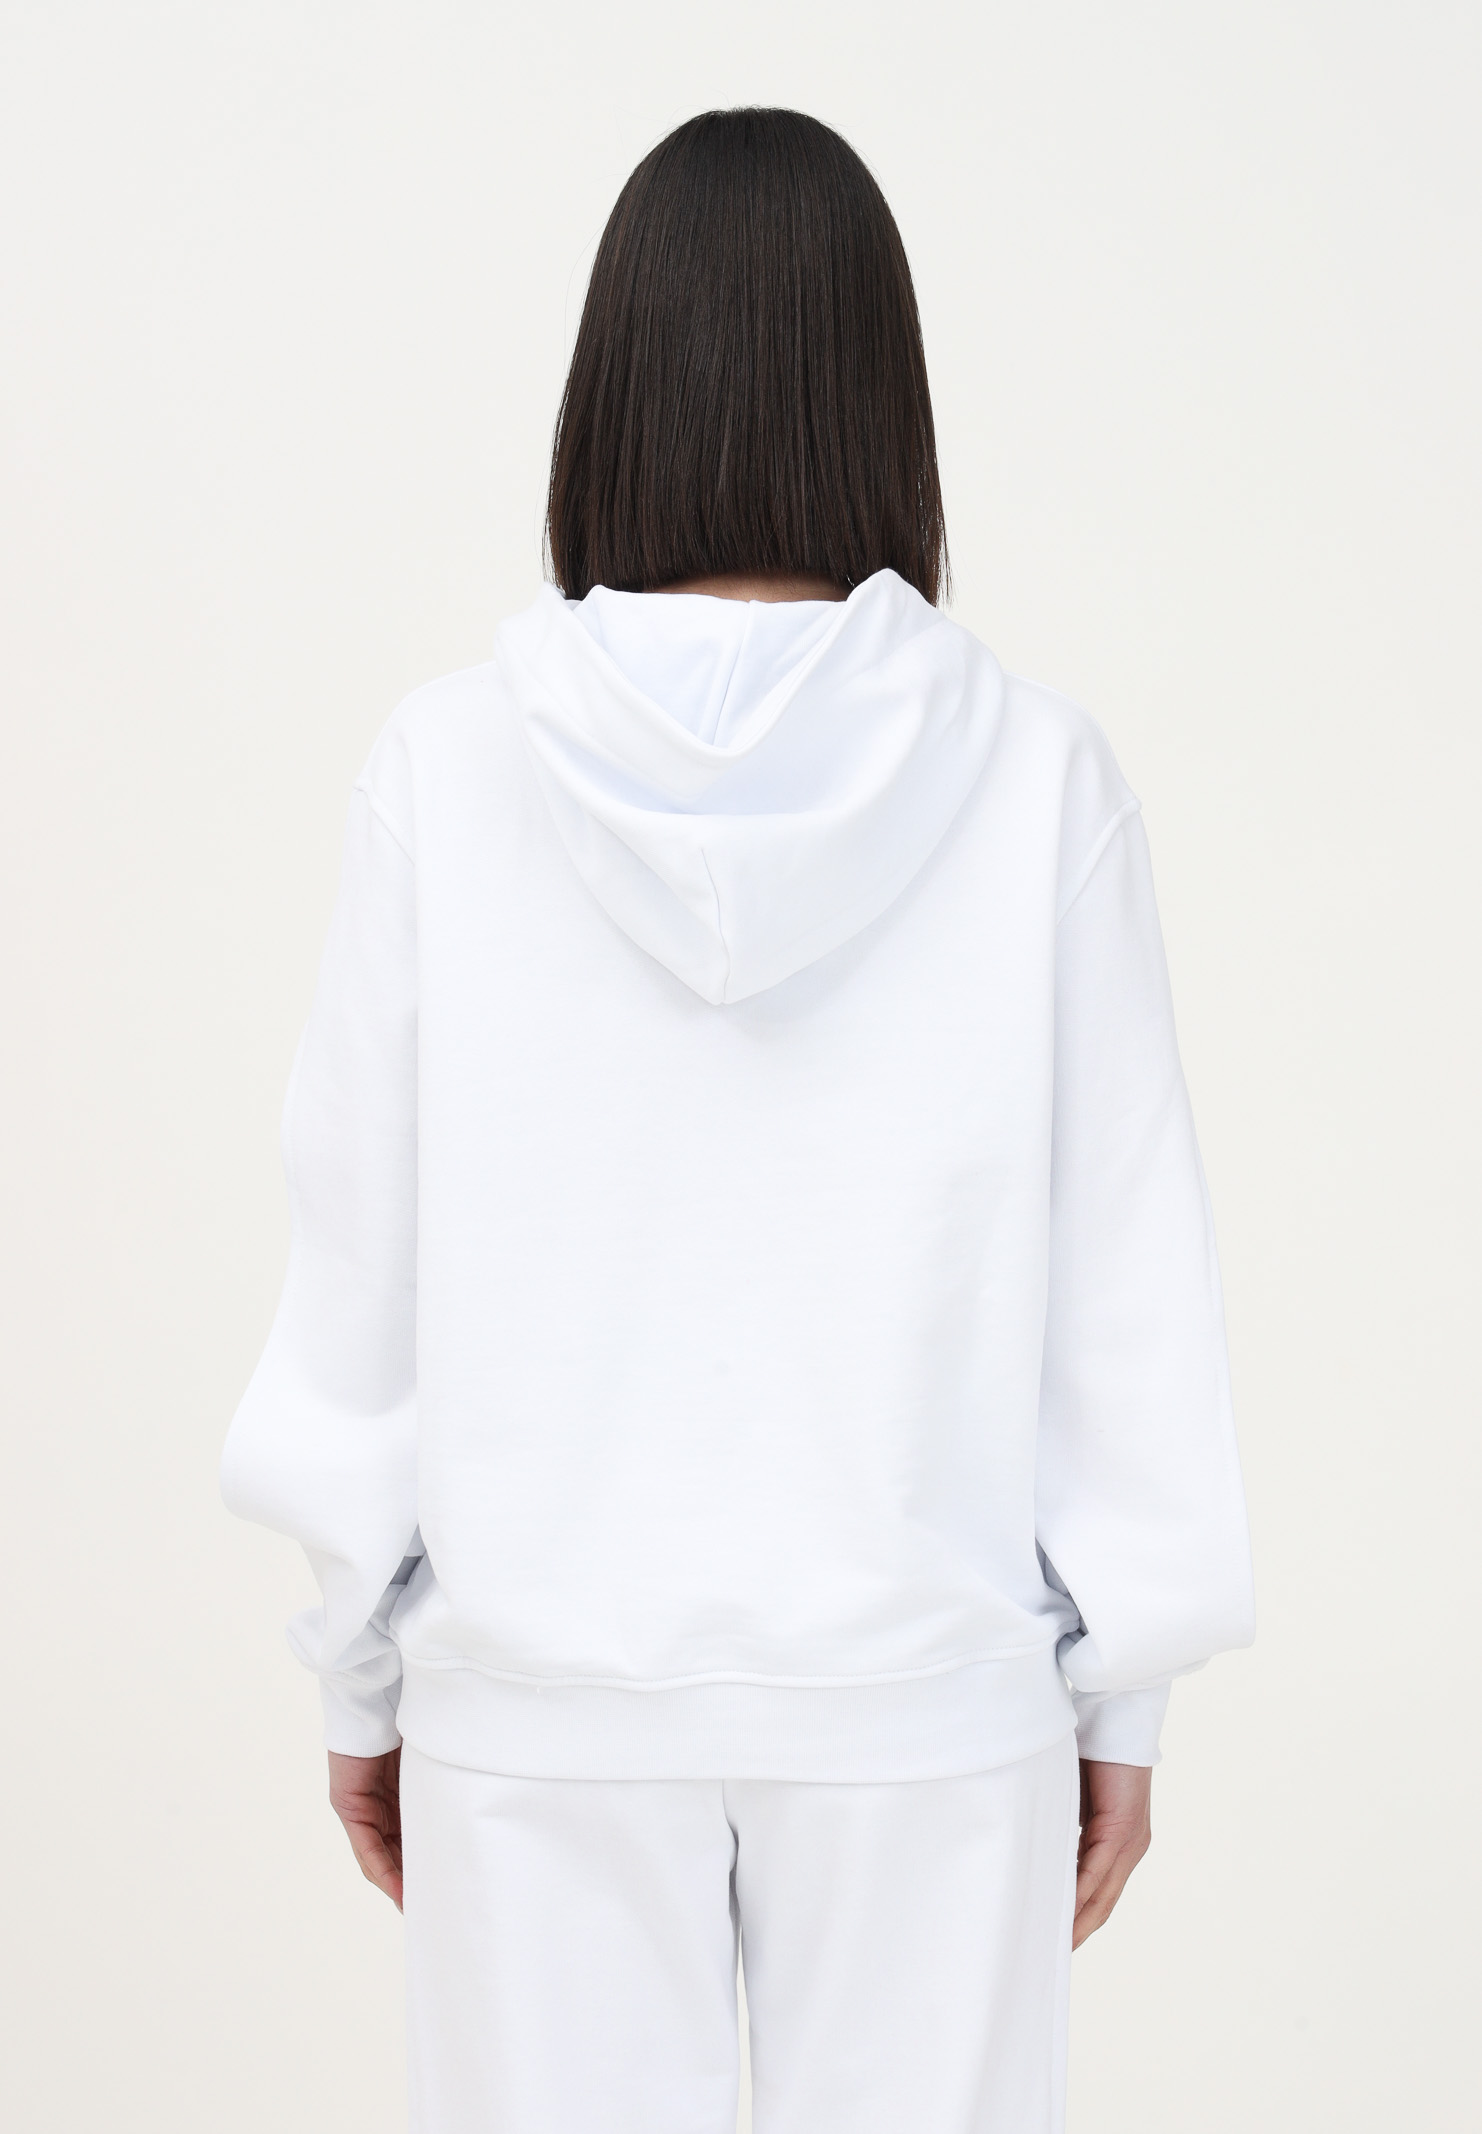 White women's hooded sweatshirt with slits along the sleeves HINNOMINATE | HNW630BIANCO